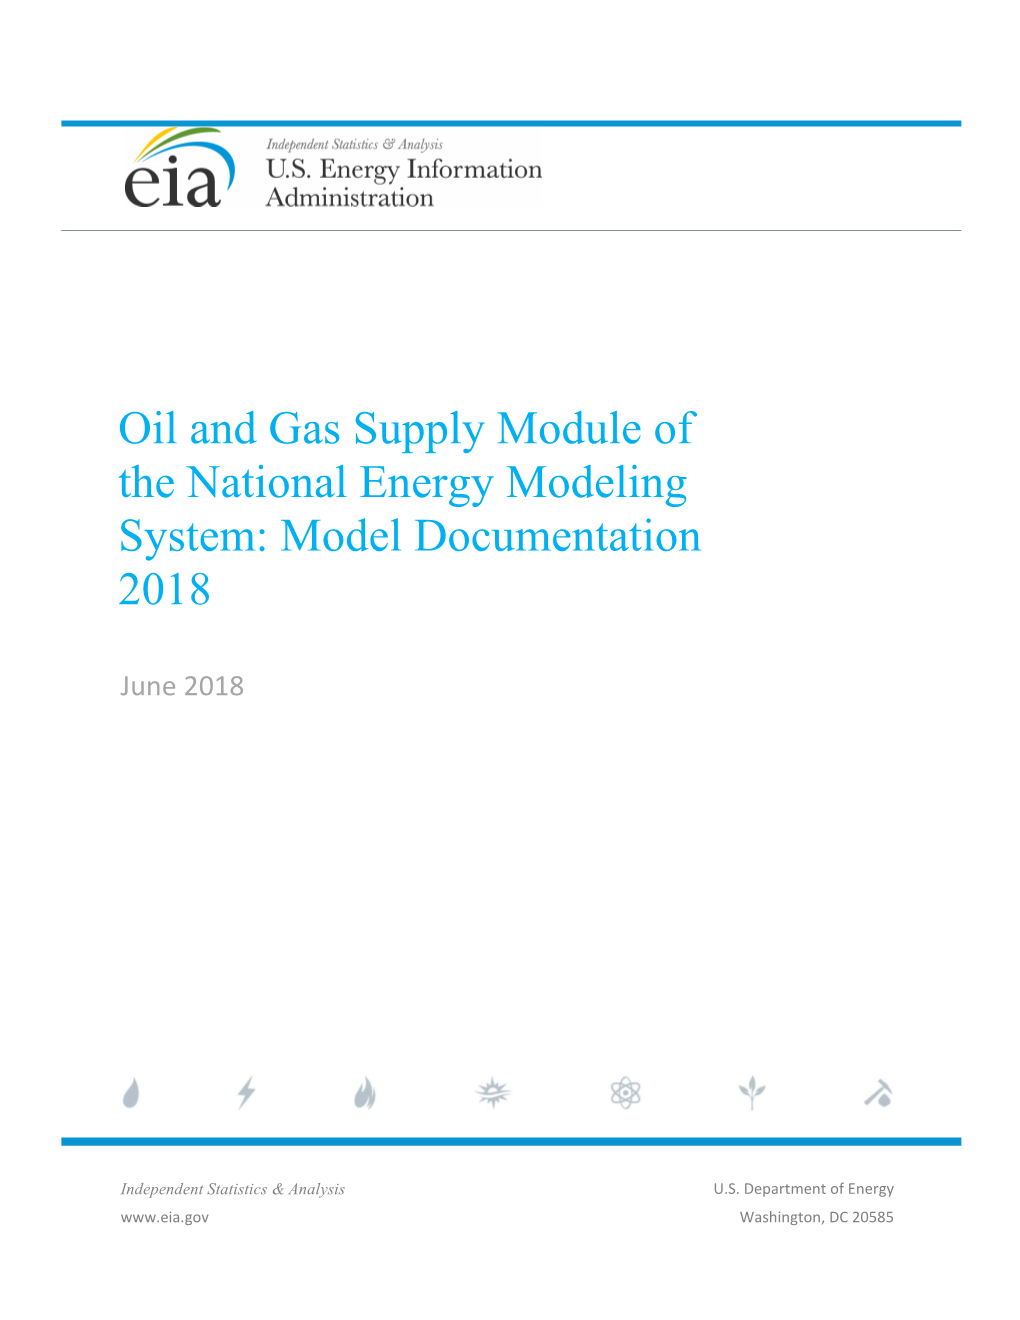 Oil and Gas Supply Module of the National Energy Modeling System: Model Documentation 2018